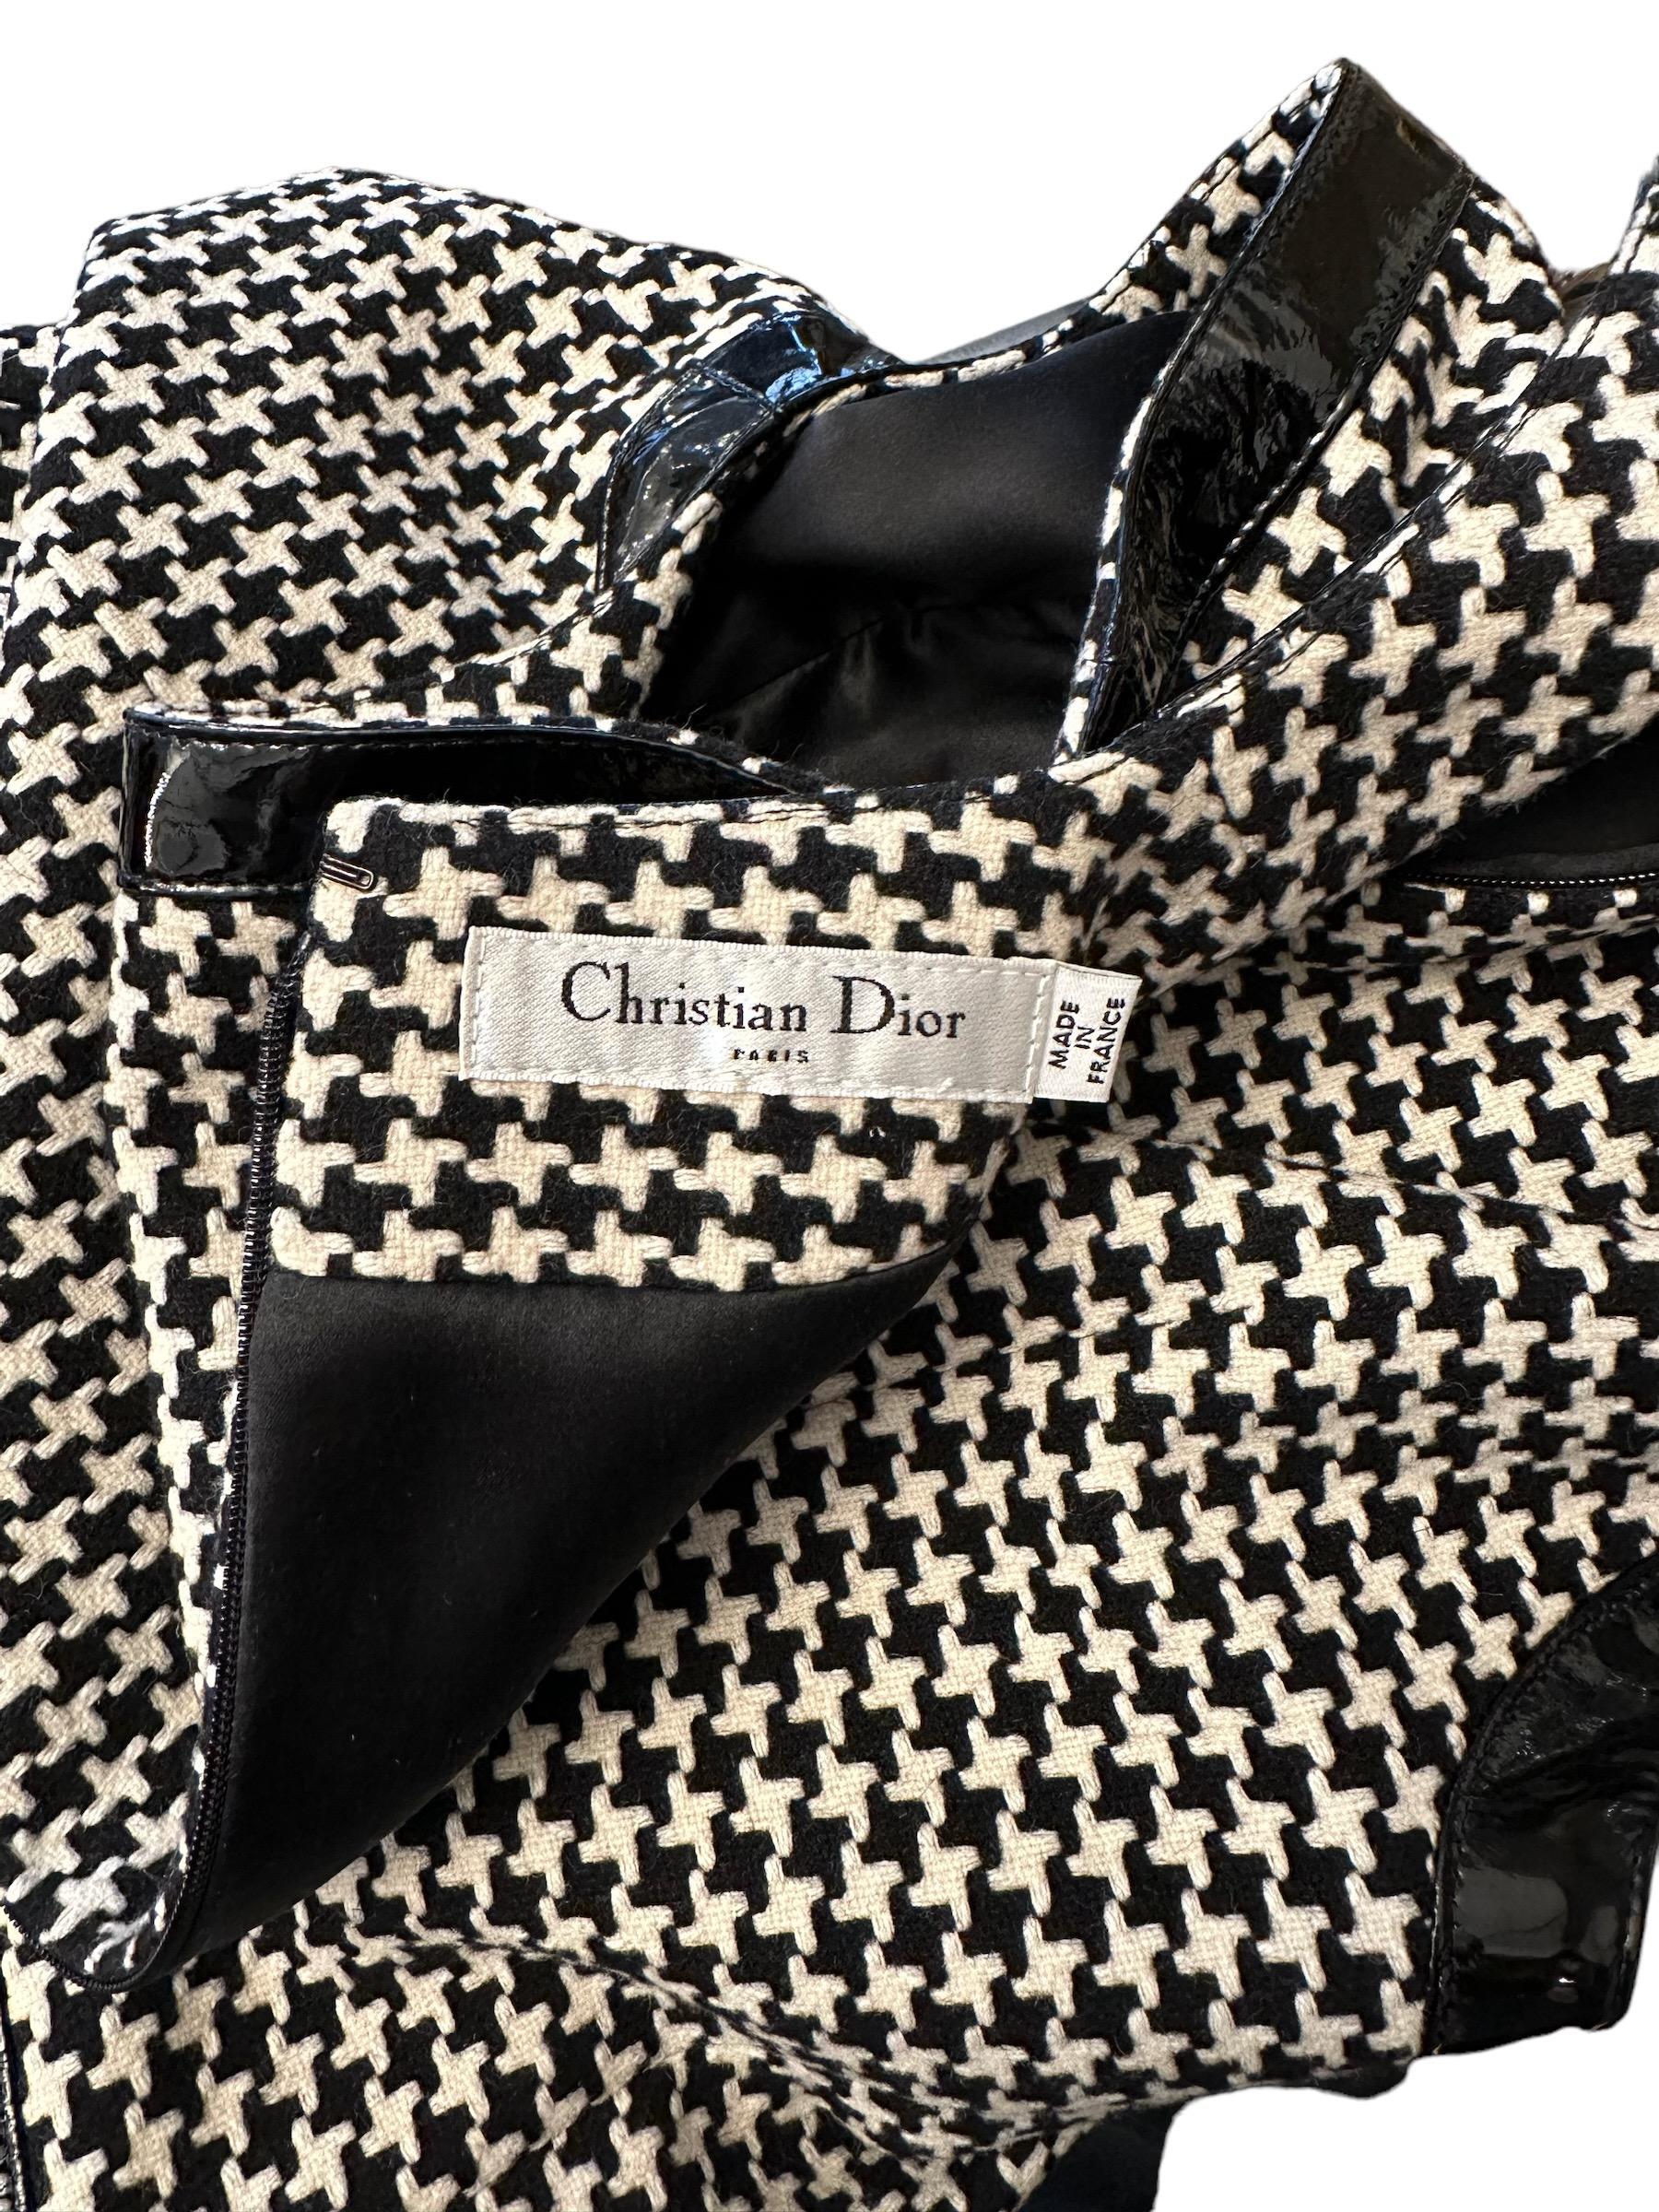 Christian Dior Fall 2008 Black and Off-white Houndstooth Dress by John Galliano For Sale 3